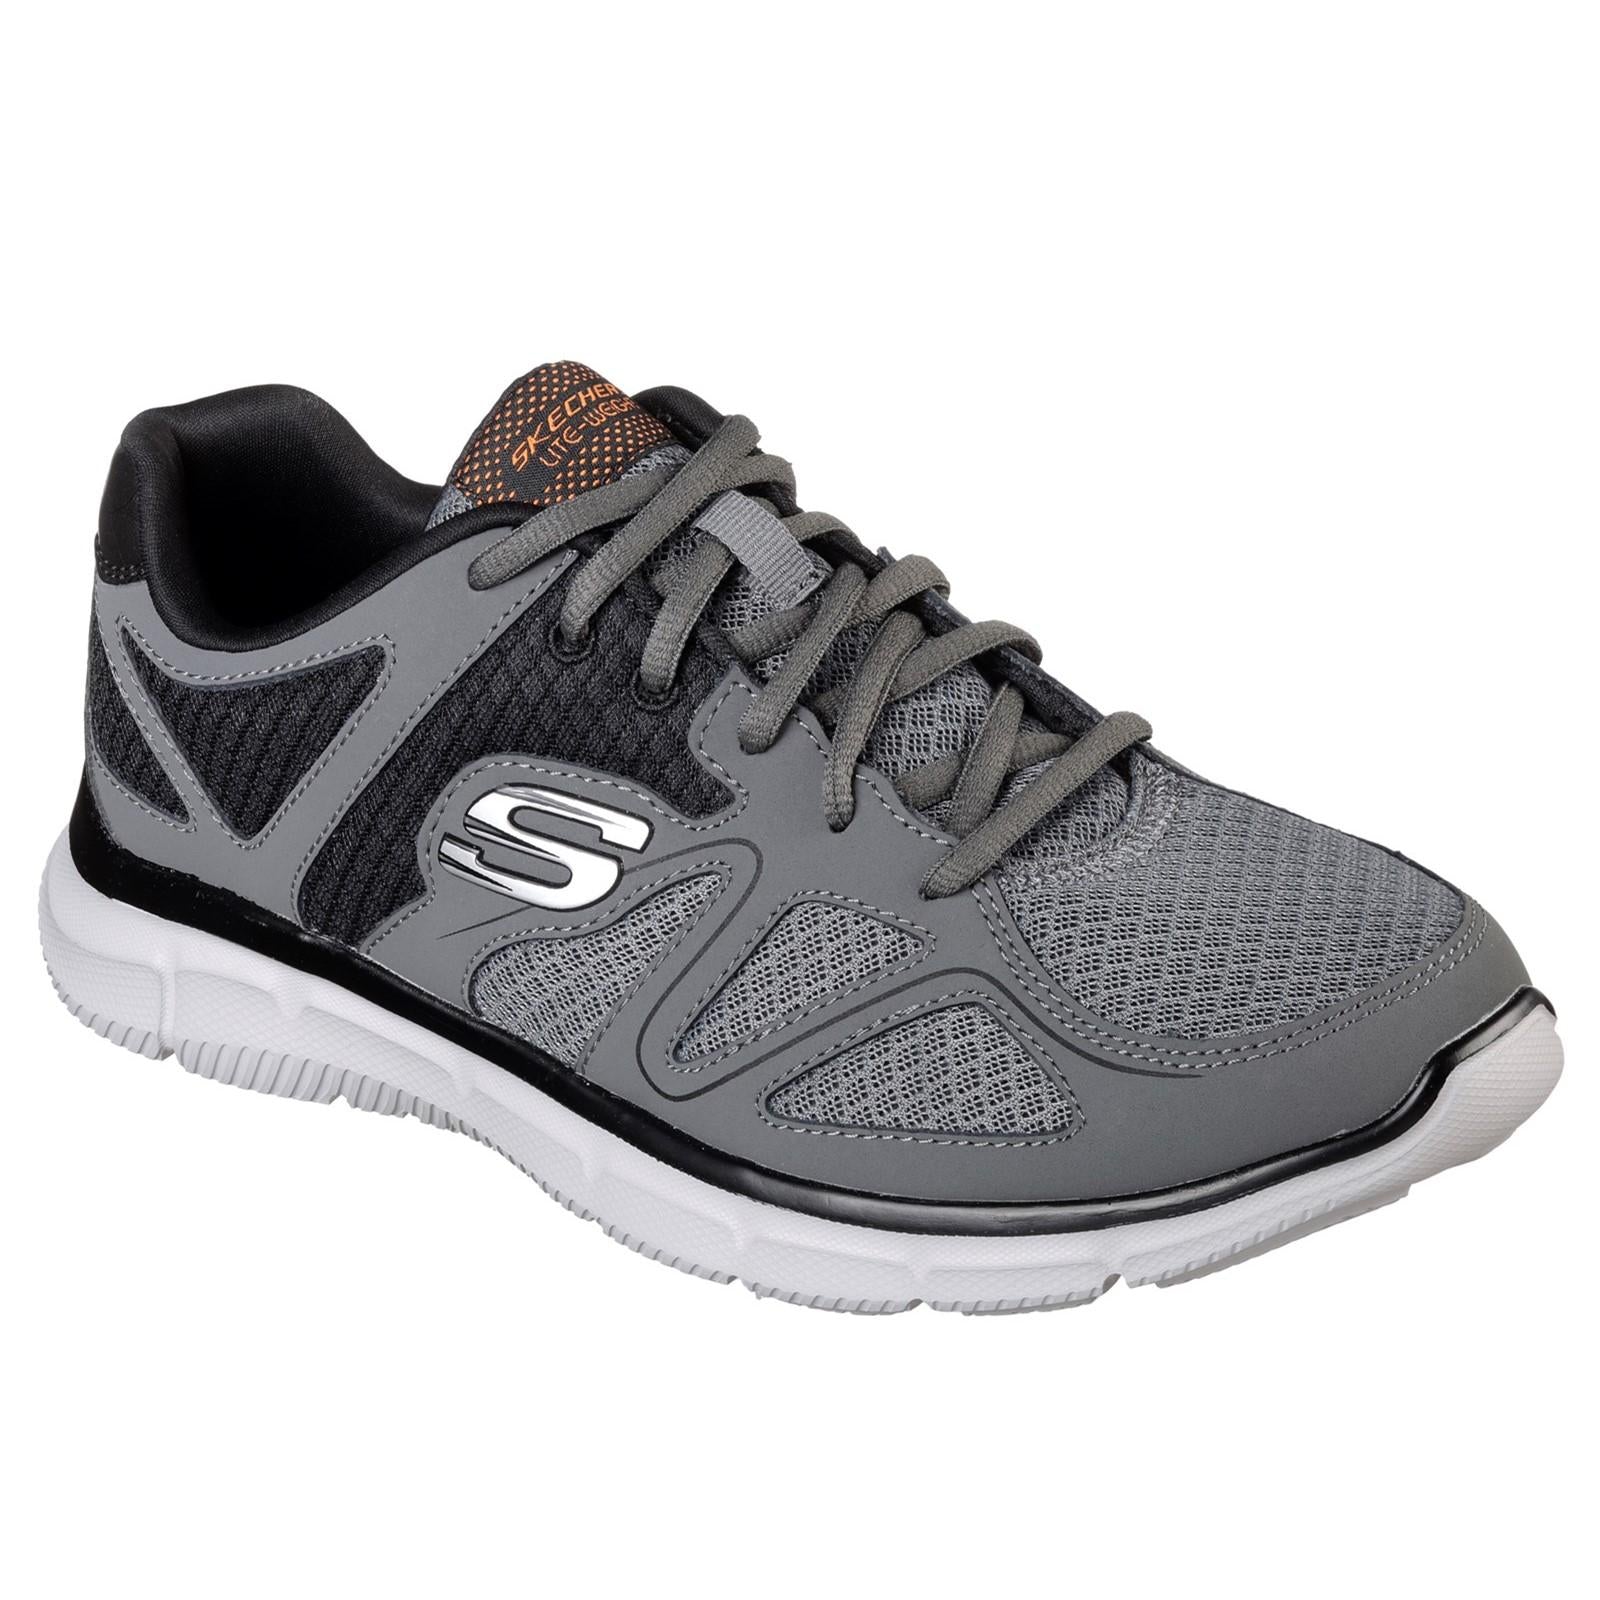 Skechers Verse Flash Point Sports Shoes